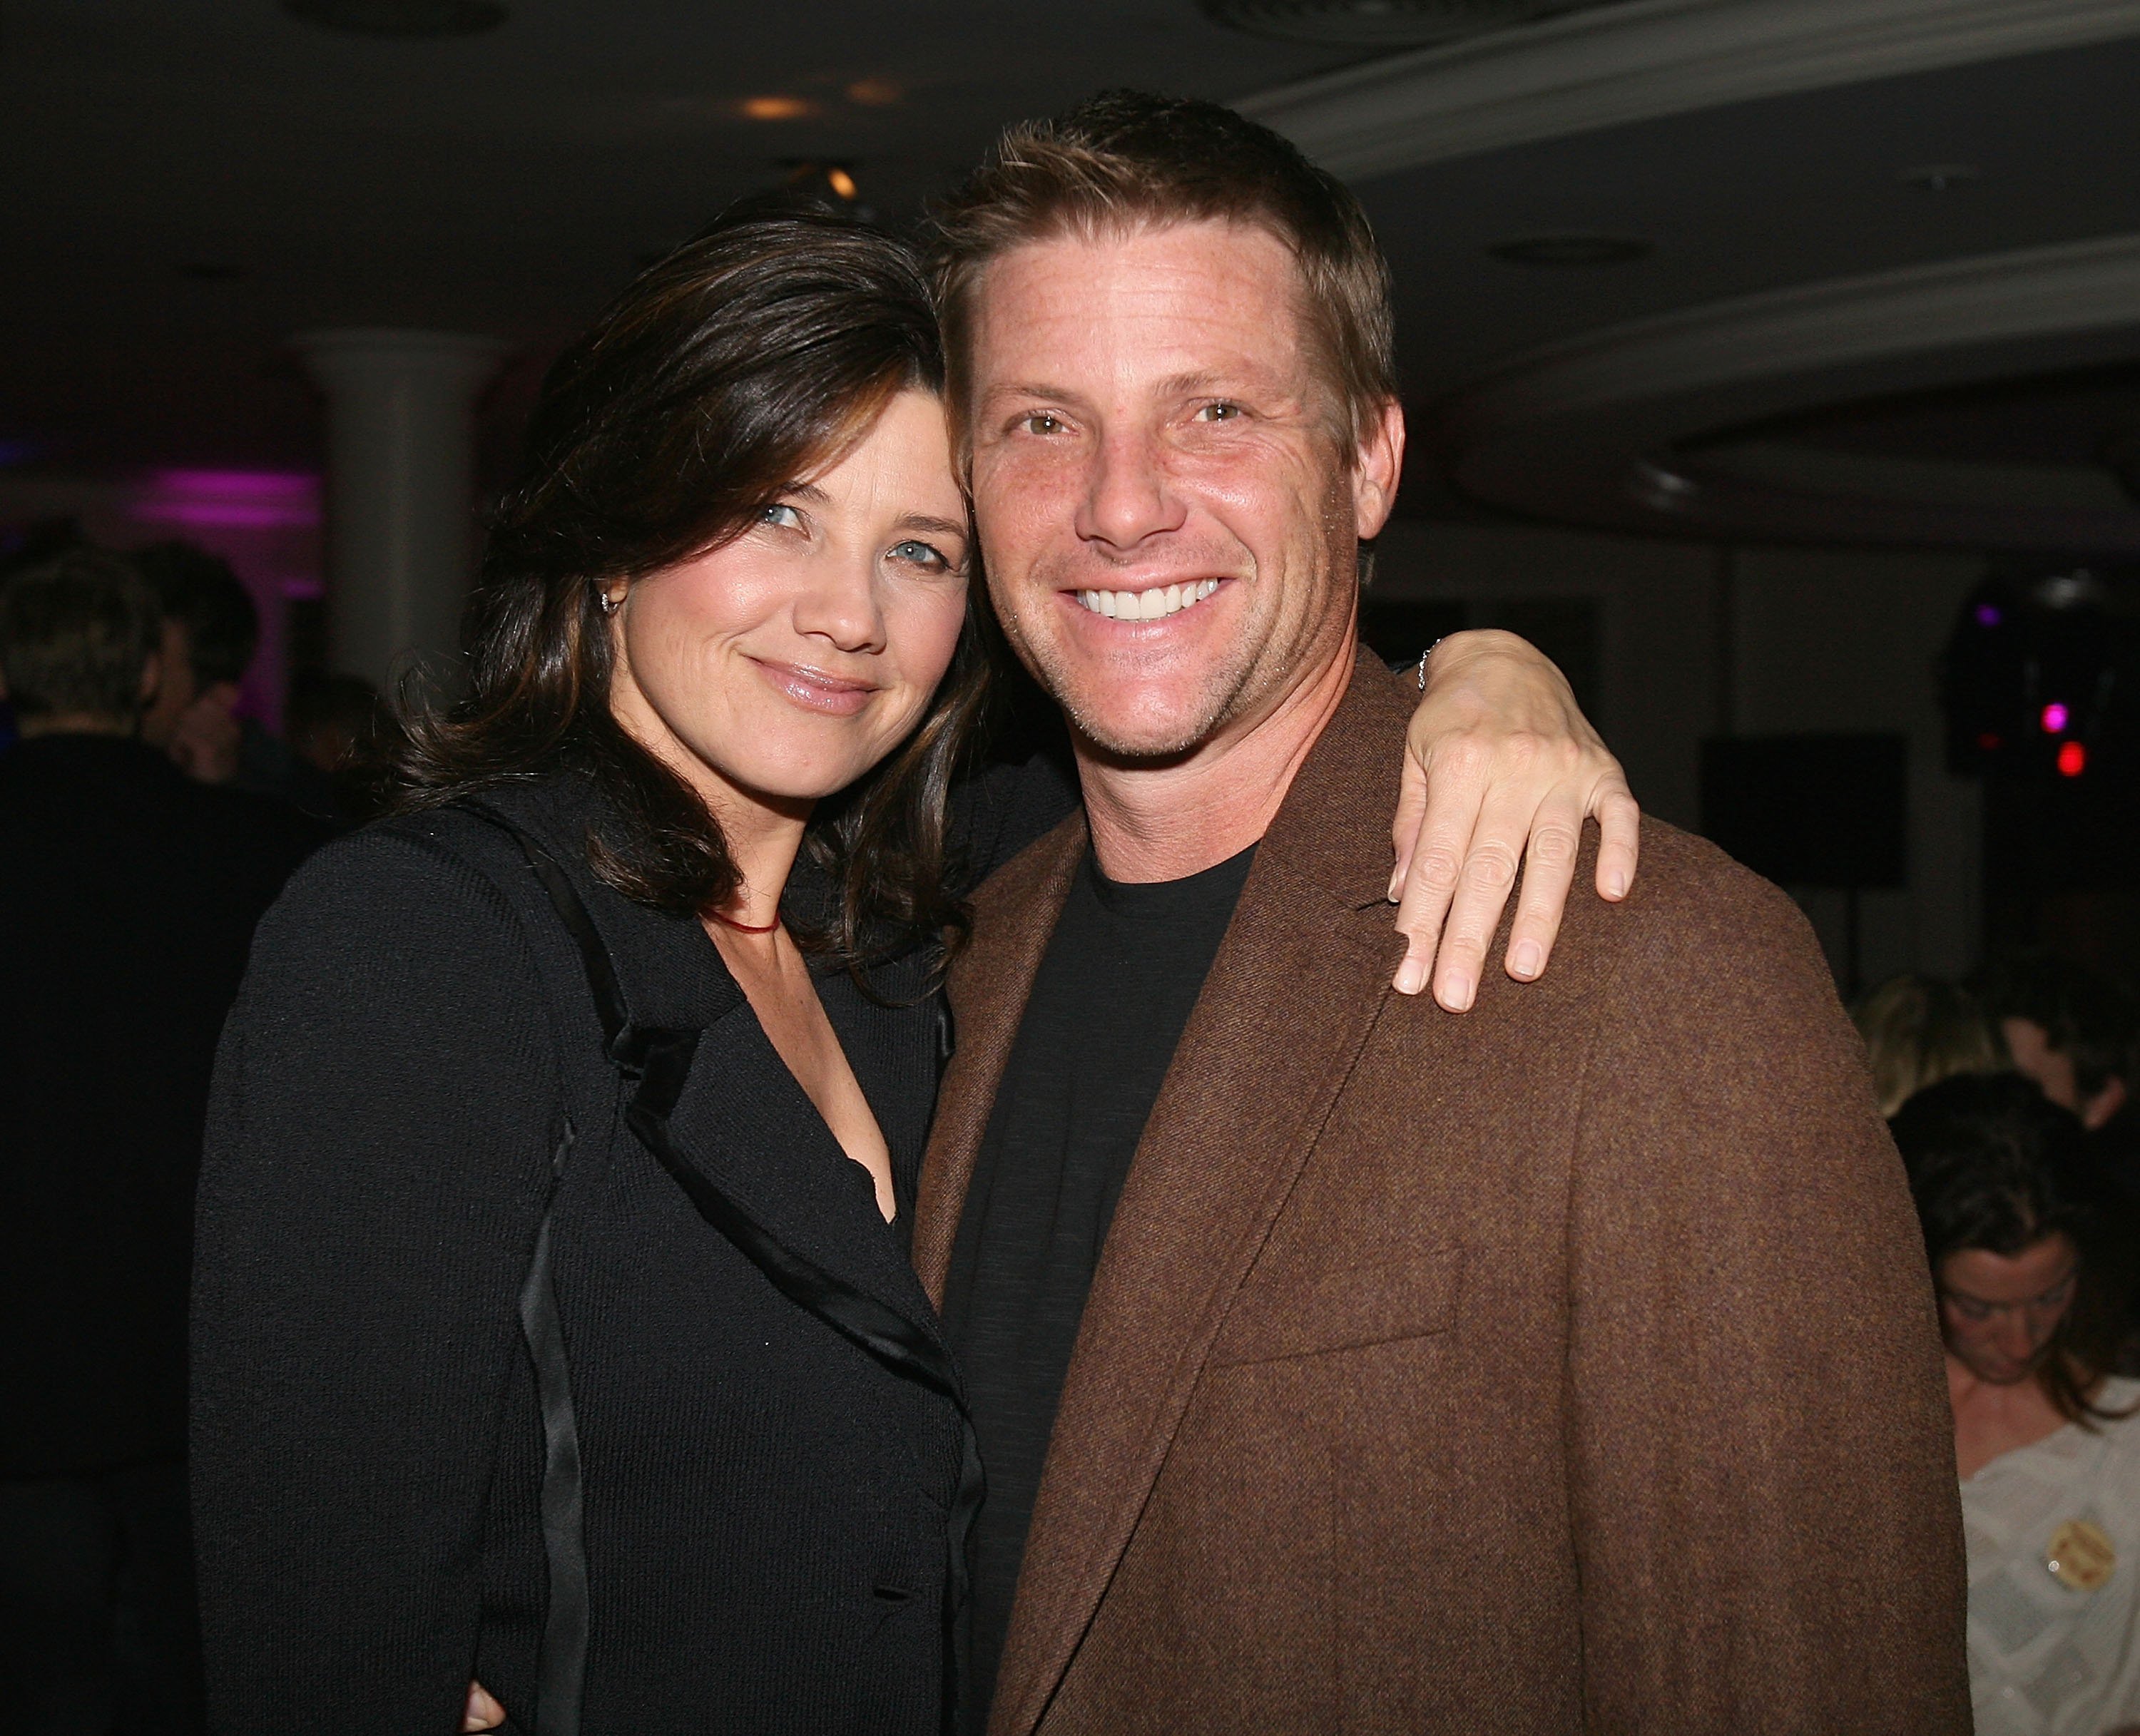 Daphne Zuniga and actor Doug Savant at the "Beverly Hills 90210 The Complete First Season" DVD party | Source: Getty Images